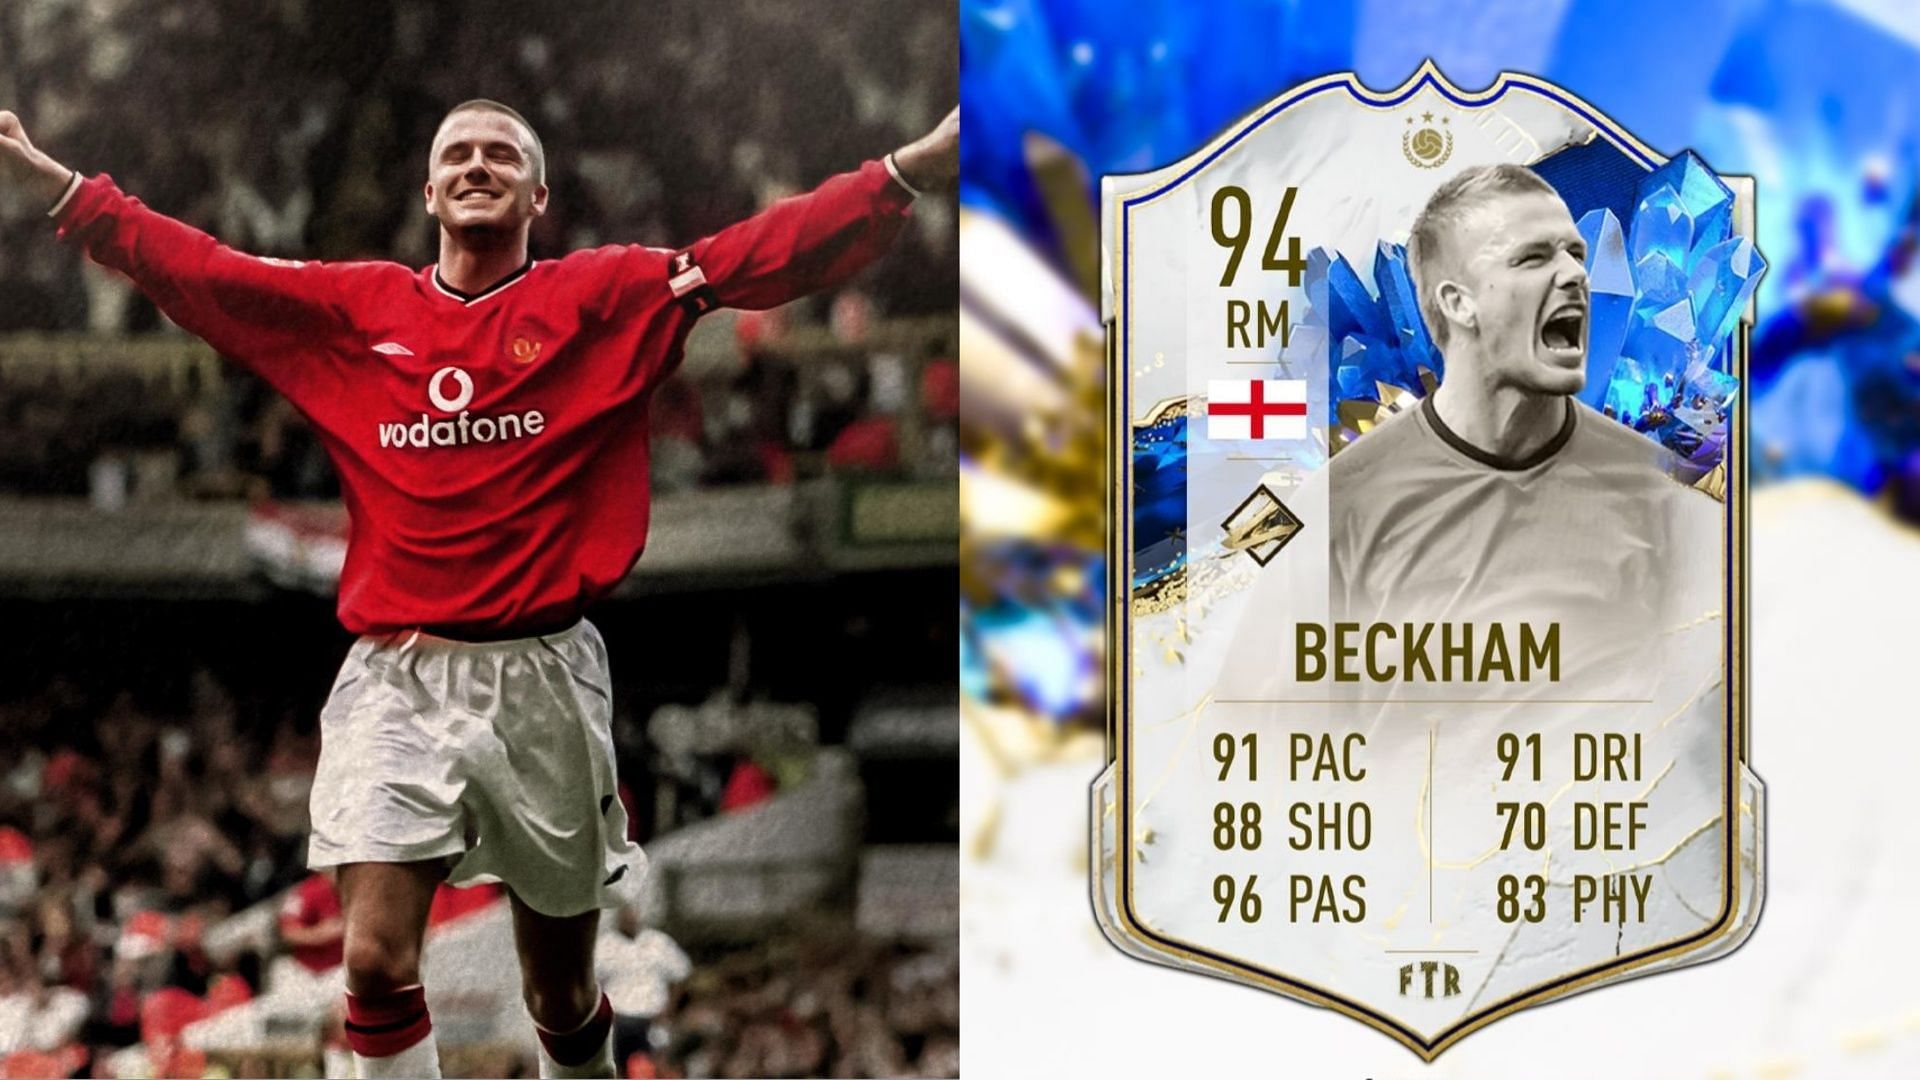 A new SBC is rumored to appear in Ultimate Team (Images via Manchester United, Twitter/FTR)